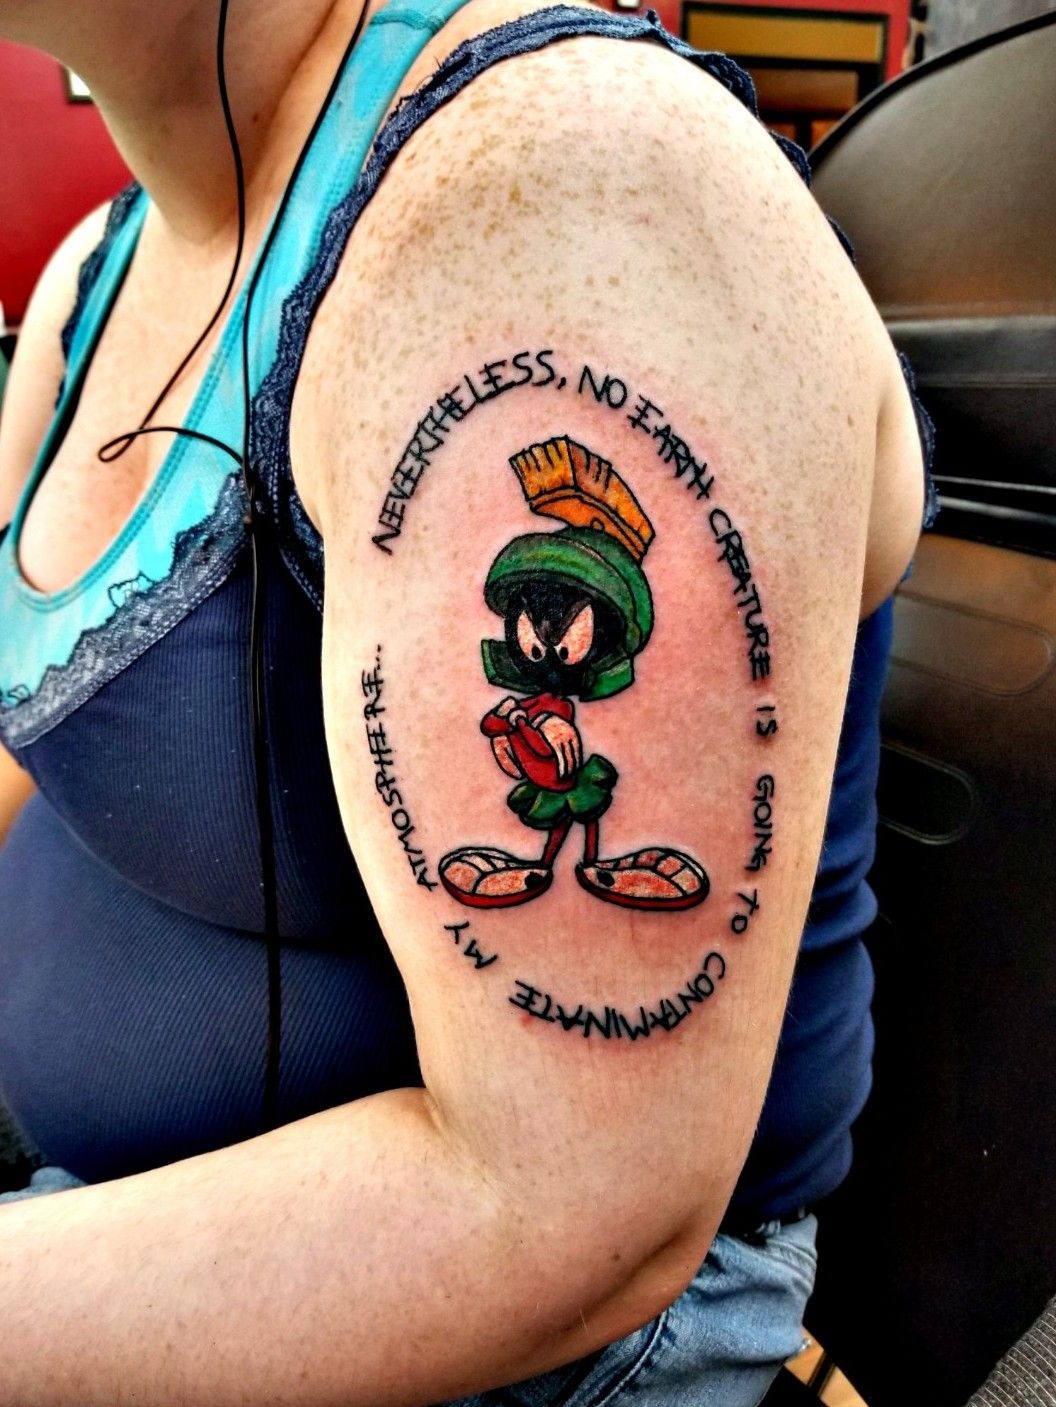 IM ALREADY DEAD  One of my all time favorite morning cartoon characters  Marvin the Martian Always kinda felt sorry for him       marvinthemartian darkart losangeles inspiration tatooideas 